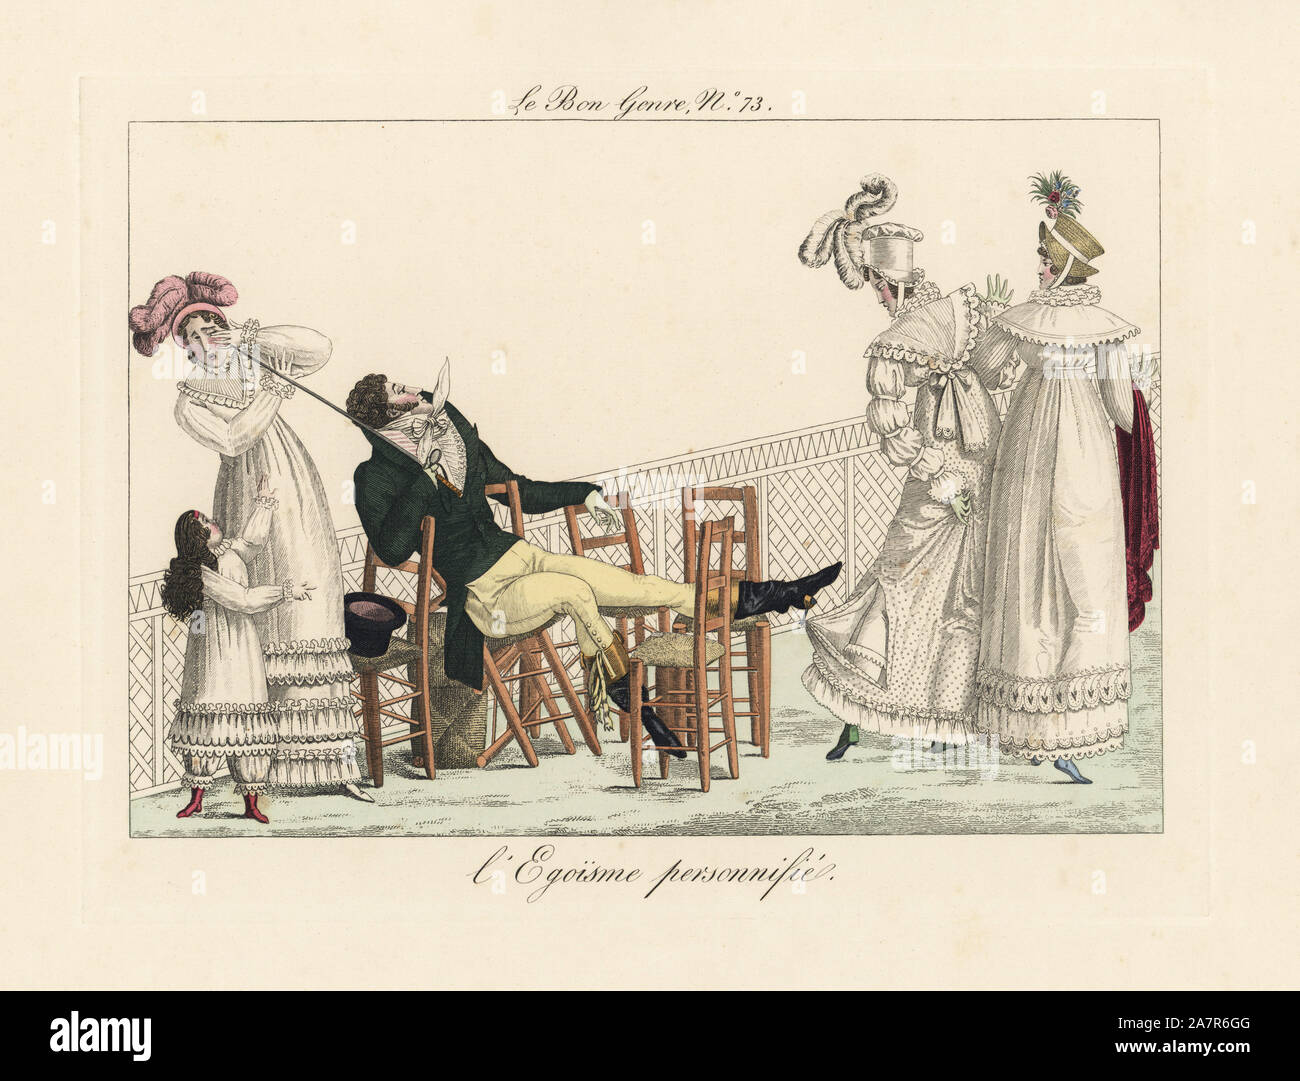 Egoism personified. 'This gentleman occupies six chairs on his own, and without regard to the arrival of strollers, he stretches out an army boot with spur and waves his whip.' Handcoloured engraving from Pierre de la Mesangere's Le Bon Genre, Paris, 1817. Stock Photo